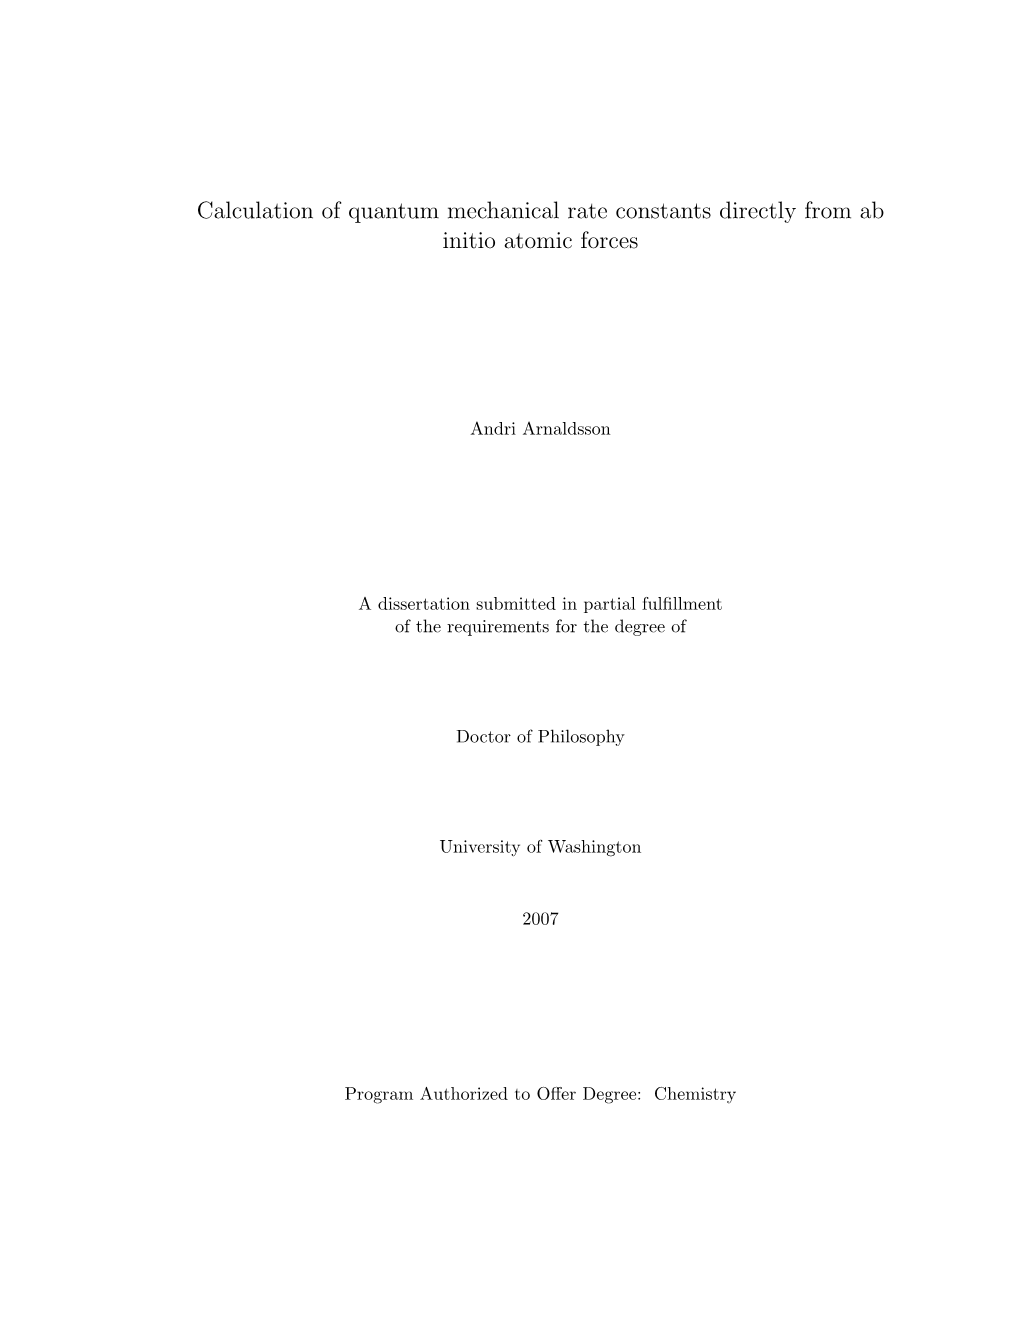 Calculation of Quantum Mechanical Rate Constants Directly from Ab Initio Atomic Forces